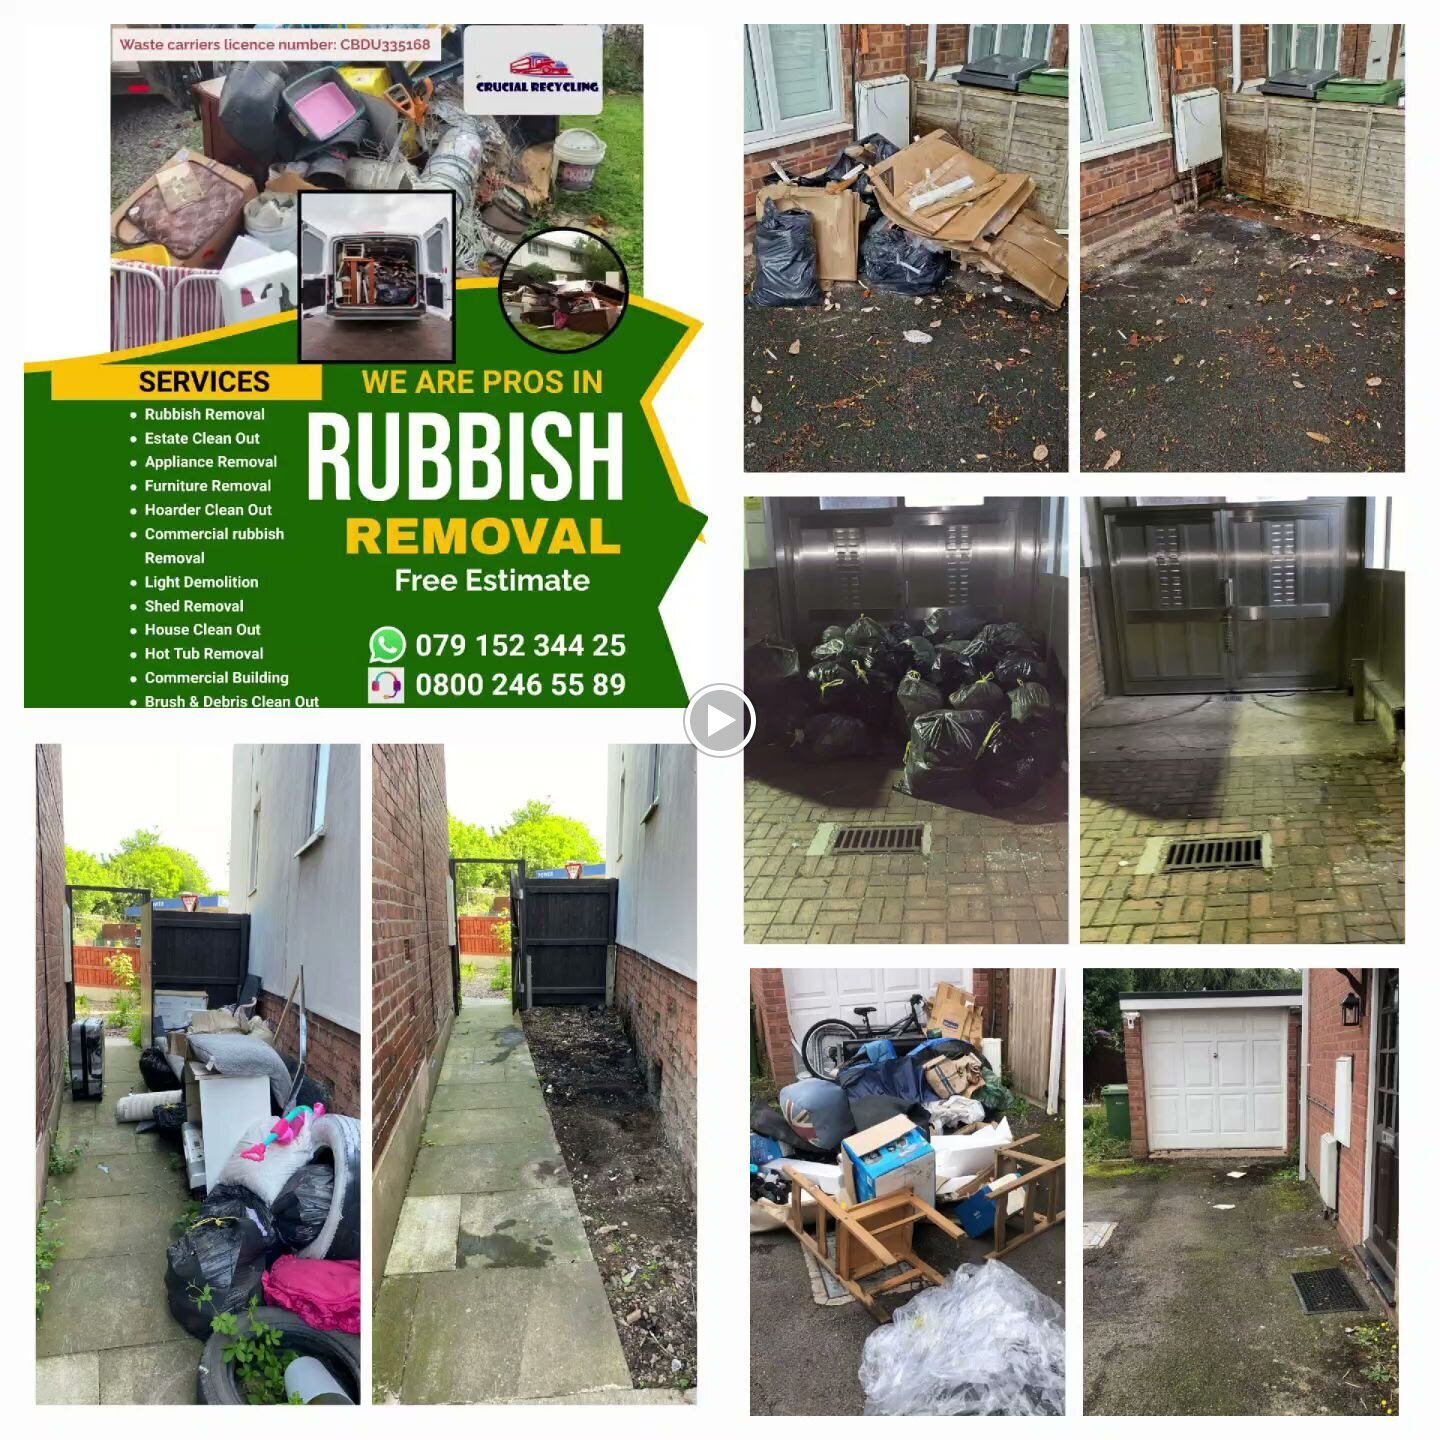 Crucial Recycling Rubbish Removals Wednesbury 07915 234425